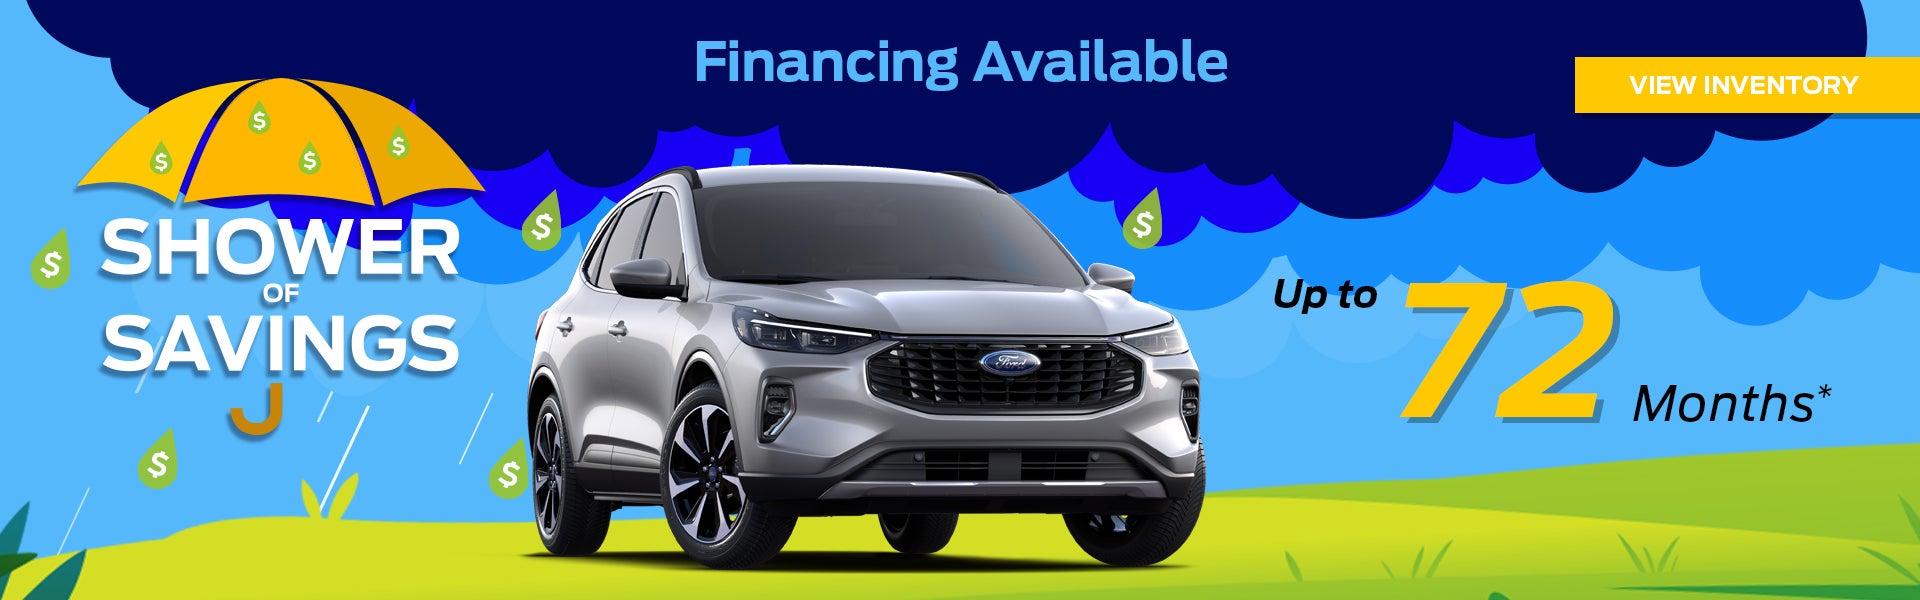 Finance for up to 72 months on select Ford models